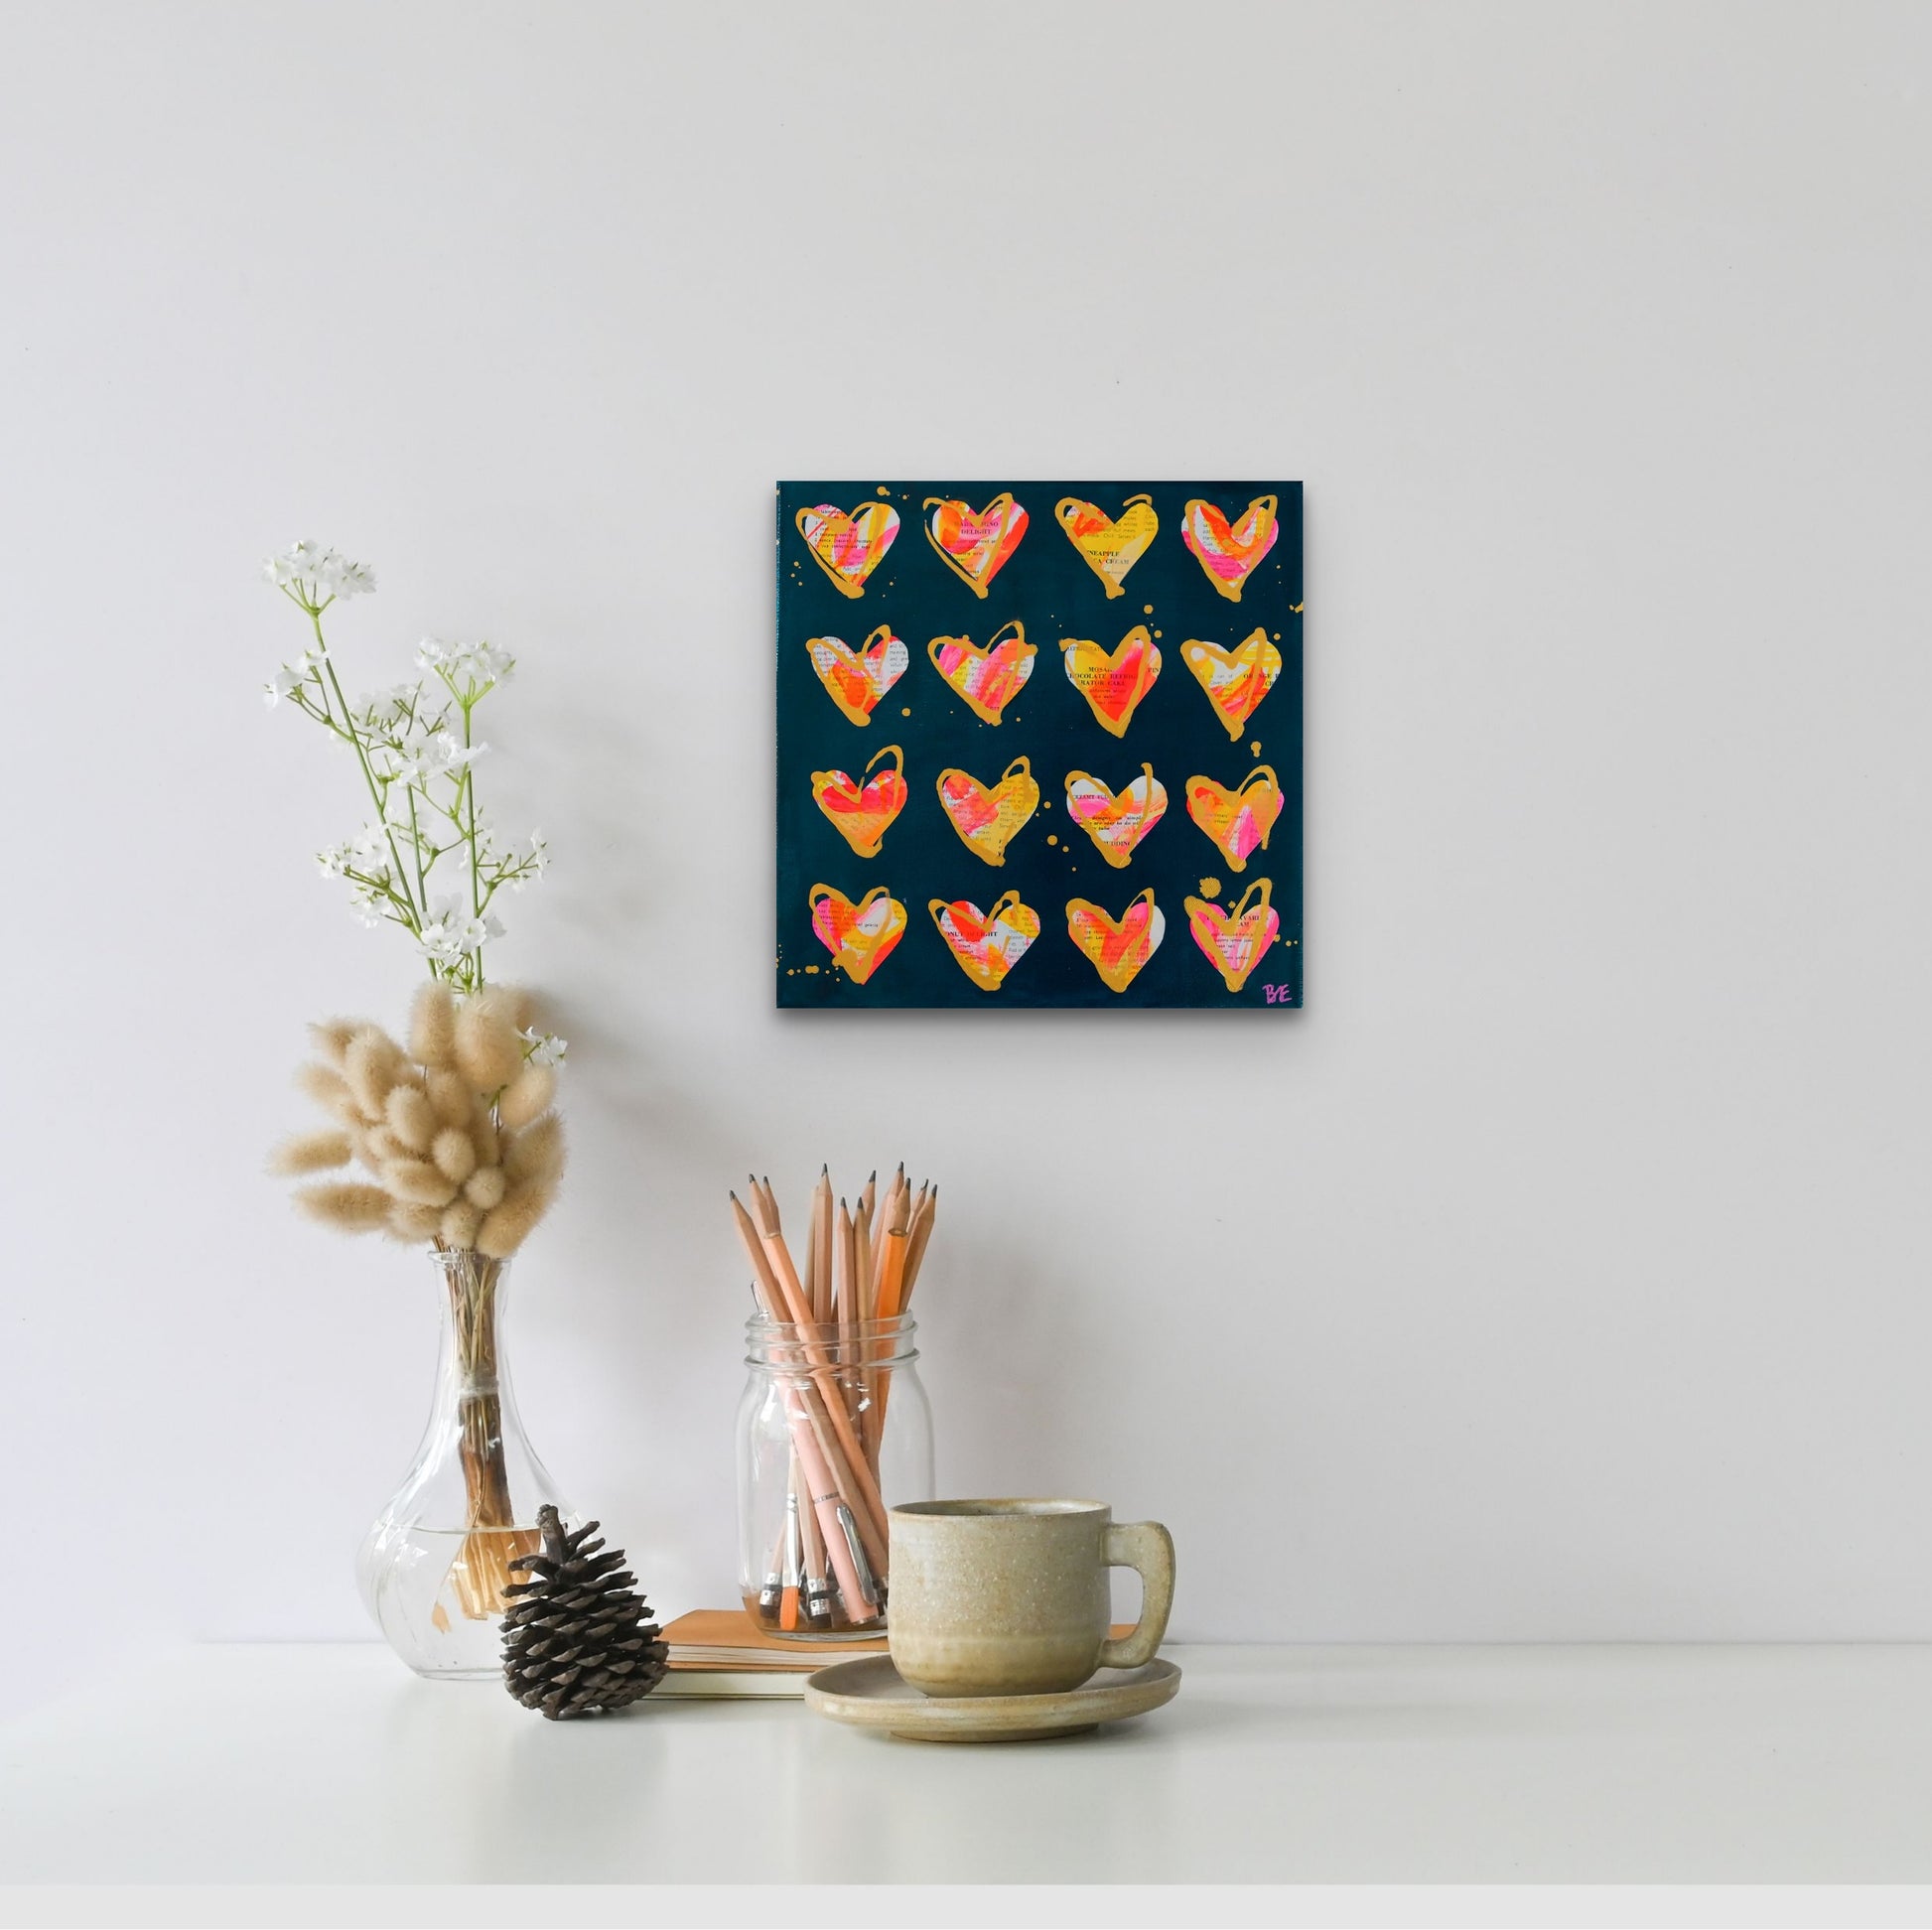 Maraschino Delight: Original Mixed Media Artwork with Vintage Cookbook and Hearts from Bridget Edwards Studio hangs on white wall behind coffee cup and jar of pencils